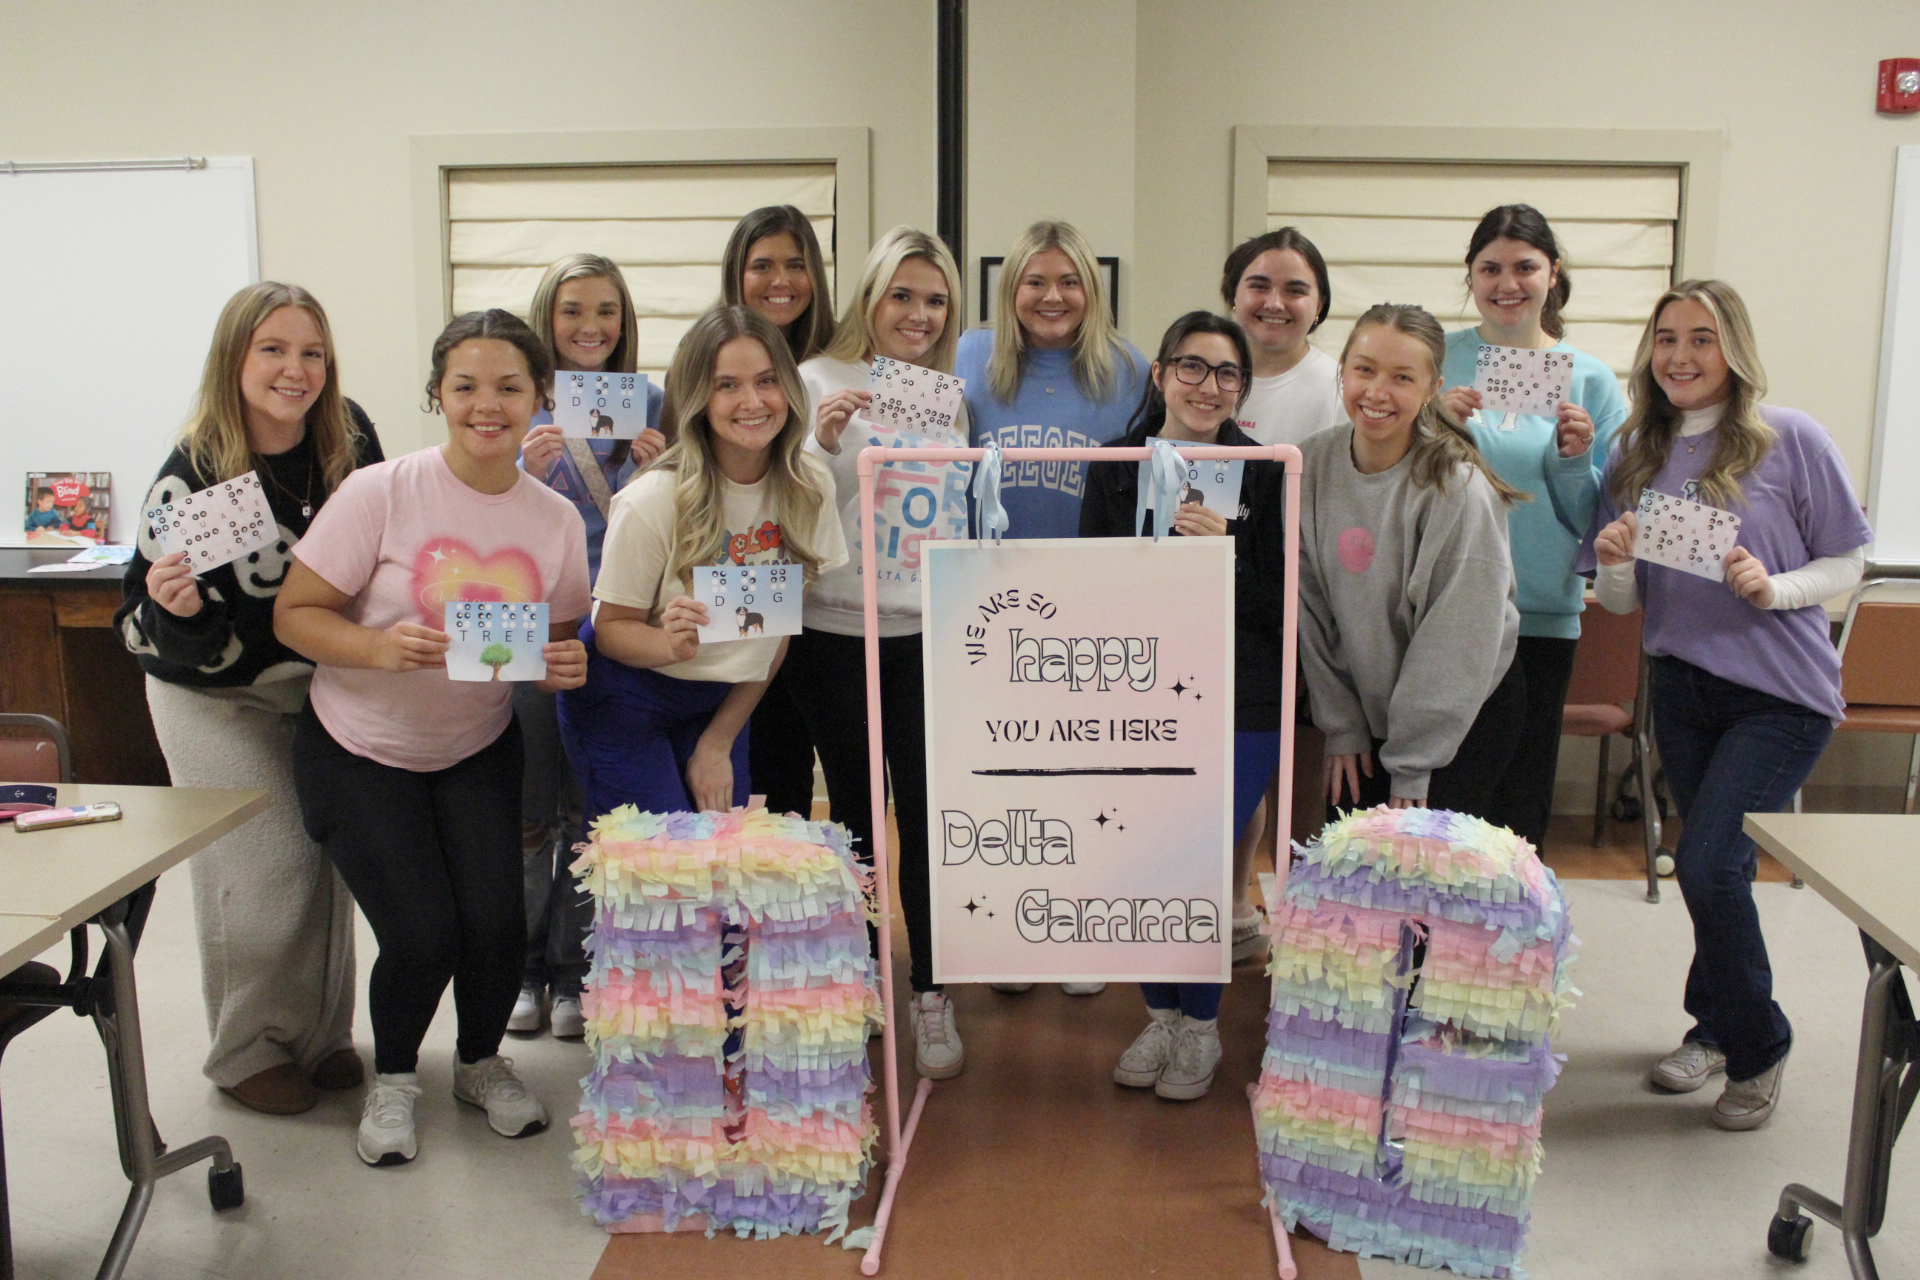 Delta Gamma members posing with braille program supplies